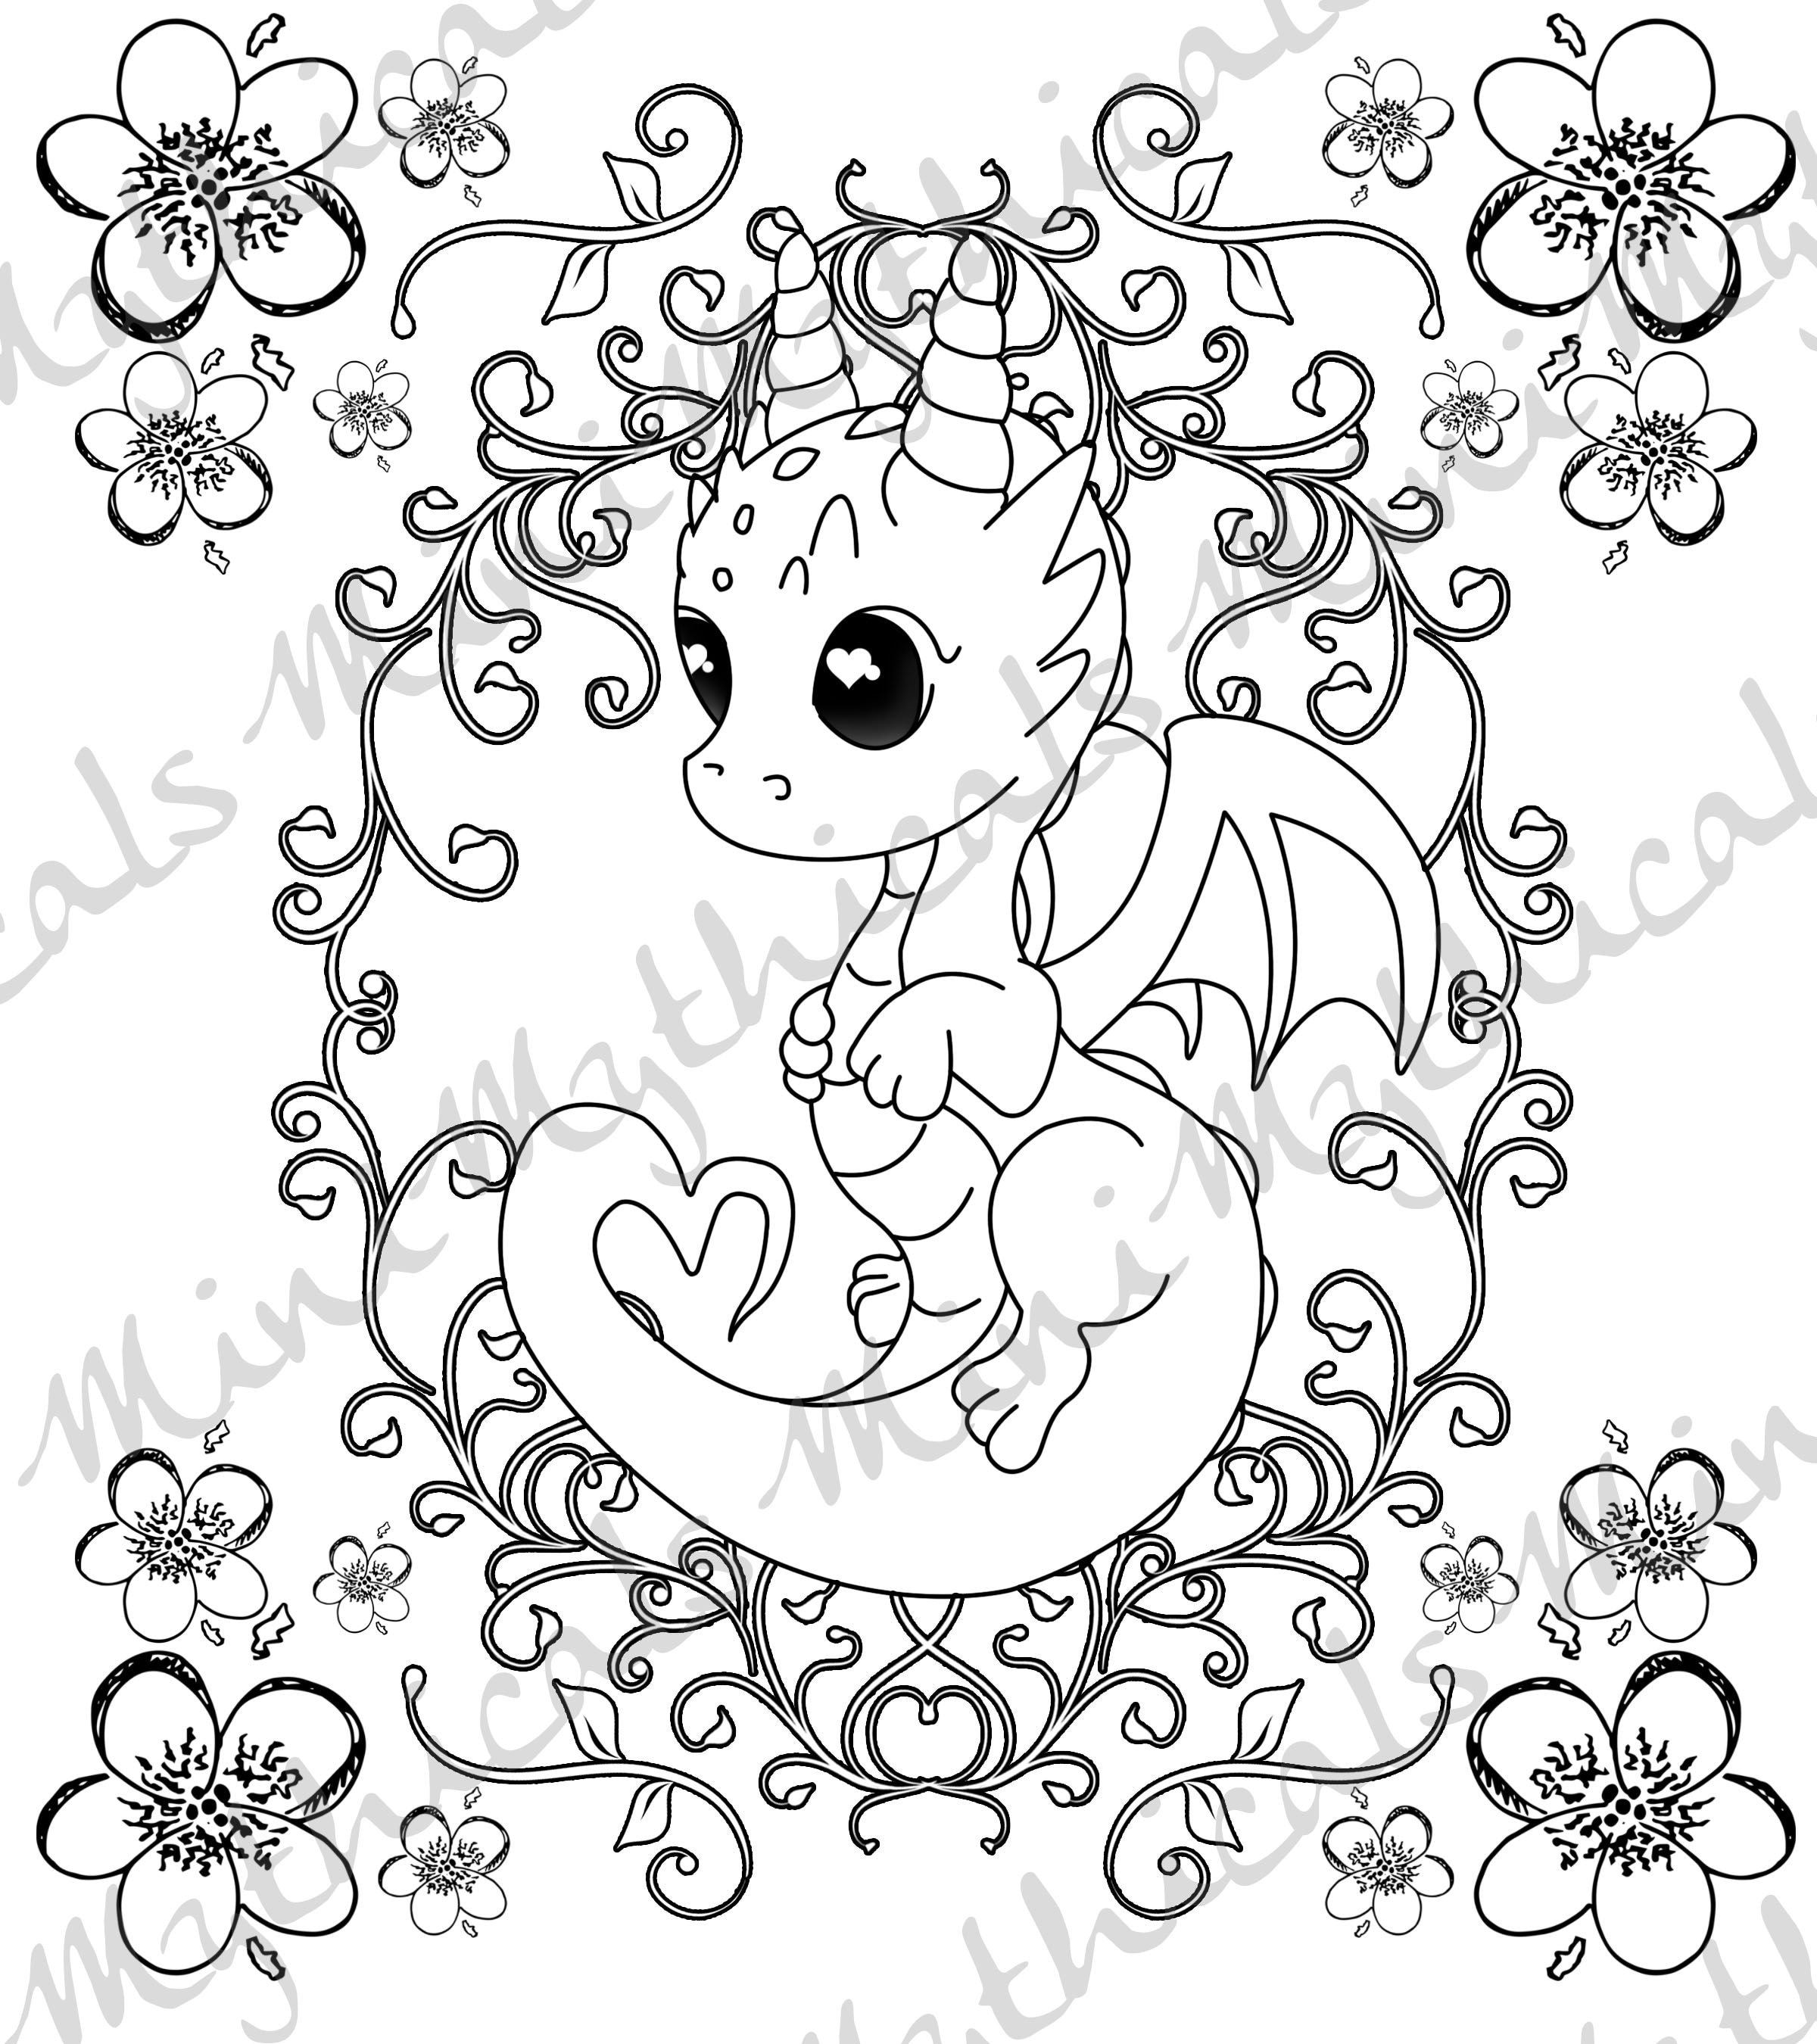 Minimythicals adult kids coloring page pack of cute mythical creature coloring dragon griffin kawaii